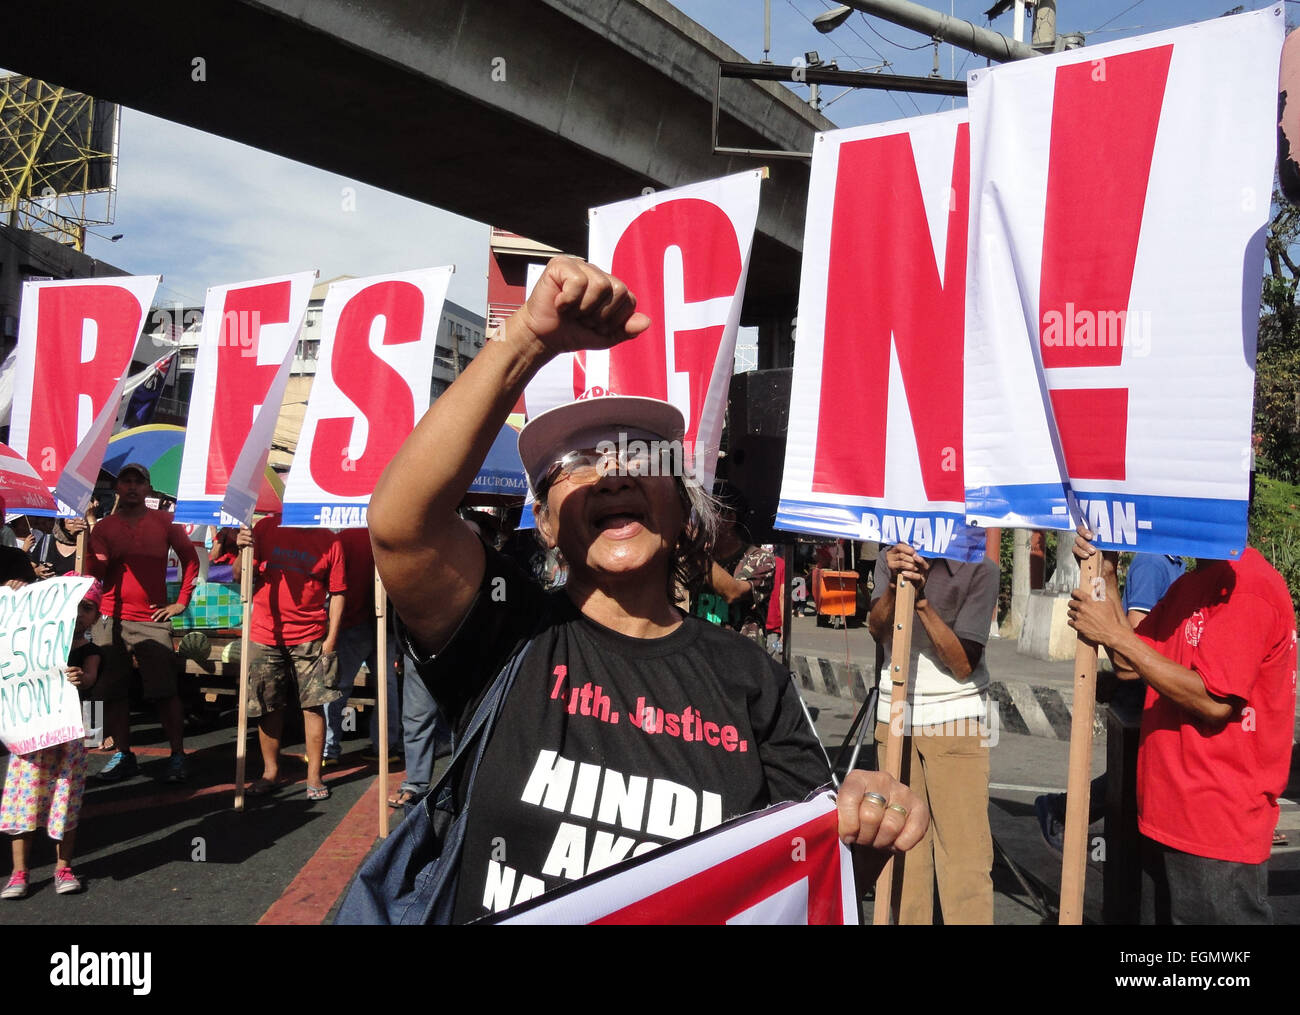 Manila, Philippines. 27th February, 2015. A protester shouts slogans during a rally at Mendiola bridge near Malacanang Palace. The protesters are calling for the resignation of President Benigno Aquino III over the Mamasapano incident that resulted in the deaths of wanted Malaysian bombmaker Zulkifri 'Marwan' bin Hir, 44 police commandos, 18 Muslim rebels, and 8 civilians. Credit:  Richard James Mendoza/Pacific Press/Alamy Live News Stock Photo